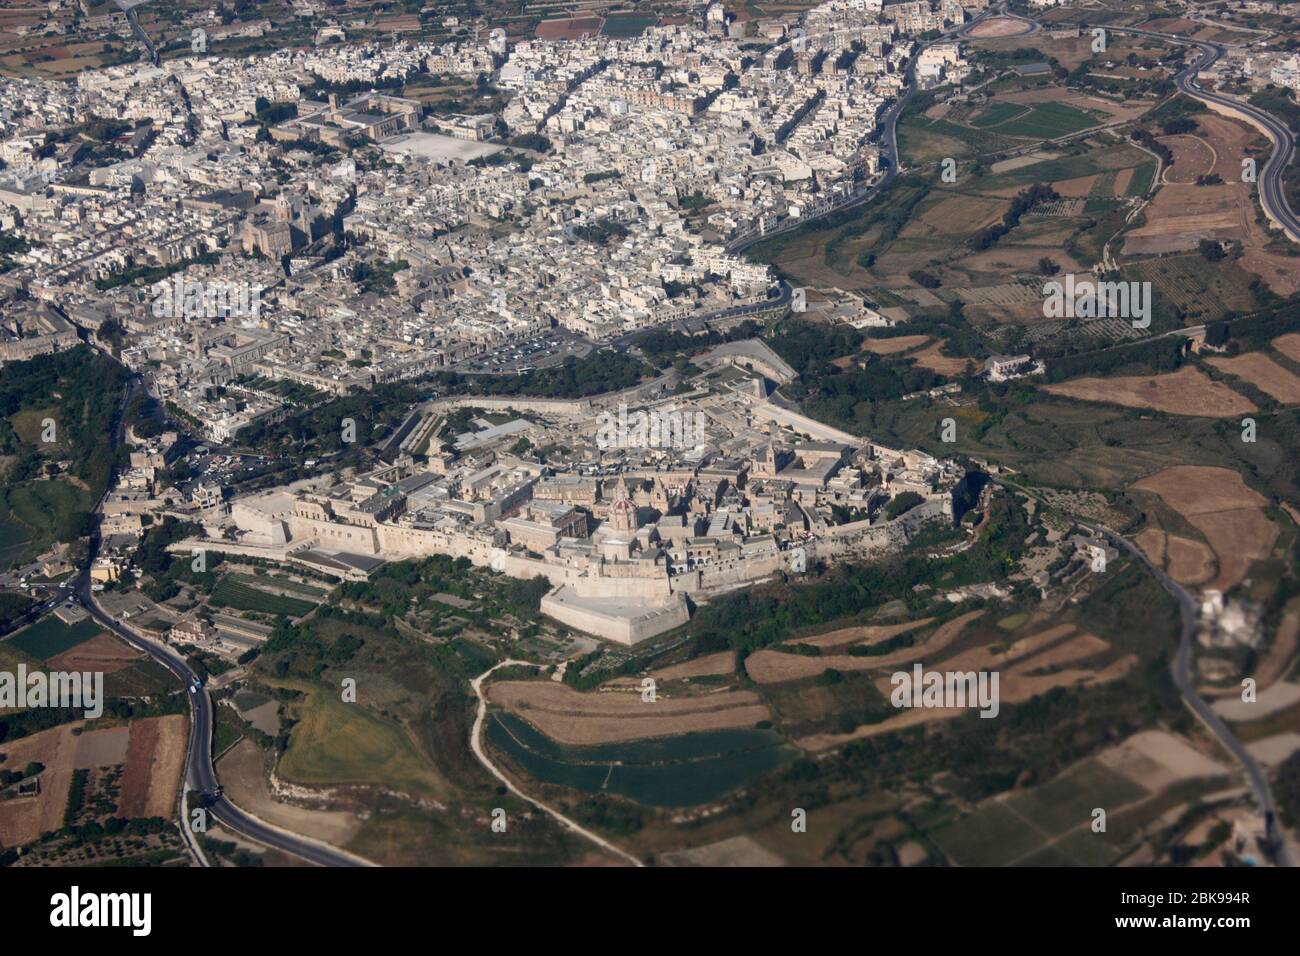 The historic walled city of Mdina and neighbouring town Rabat in Malta, as seen from the air. Travel in Europe. Aerial view. Stock Photo